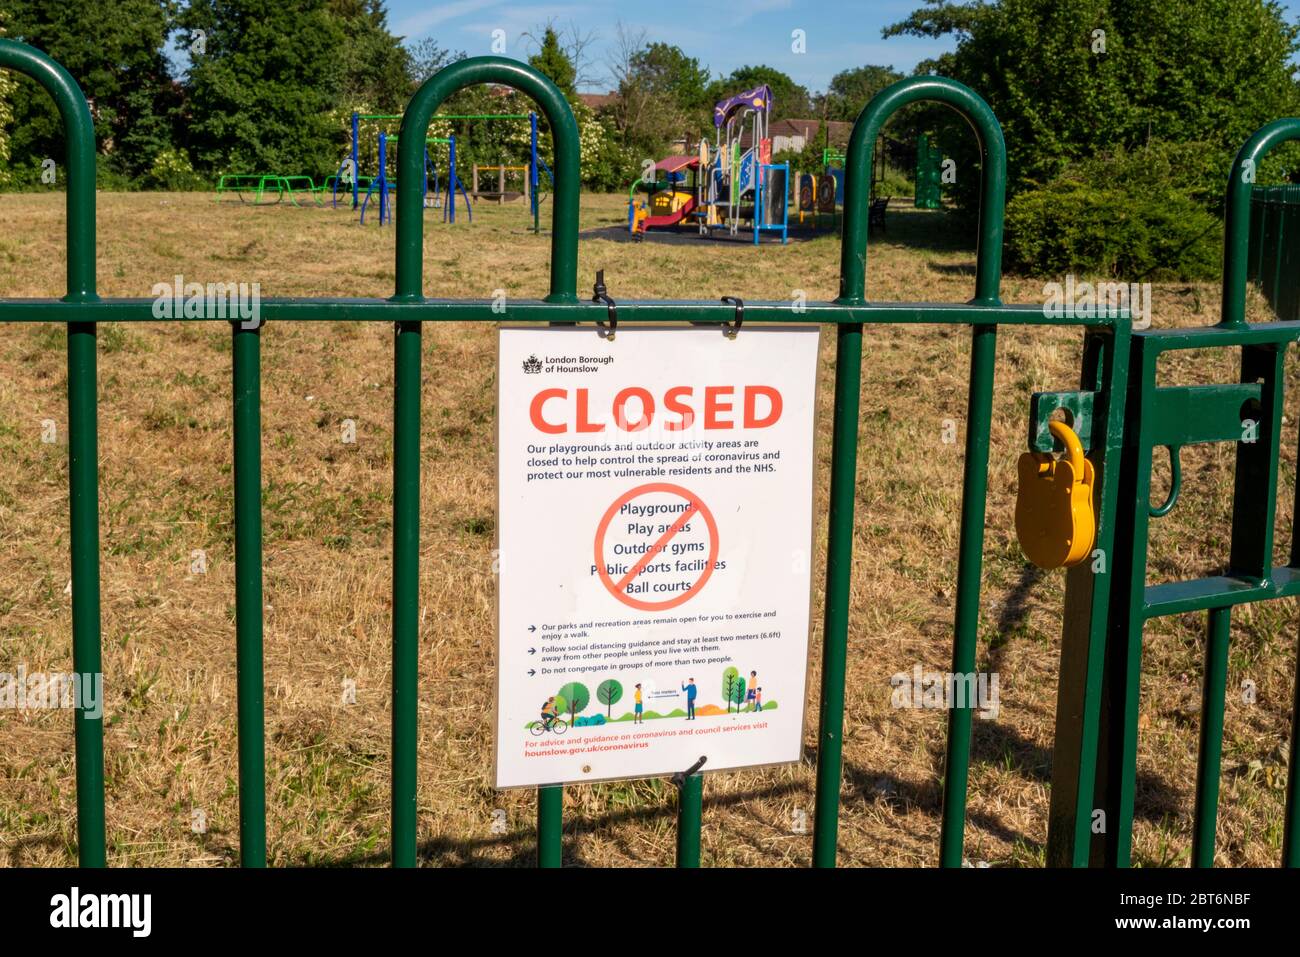 Closed park playground in Cranford, London, UK during COVID-19 Coronavirus lockdown. Shut and locked outside play area with warning sign on sunny day Stock Photo